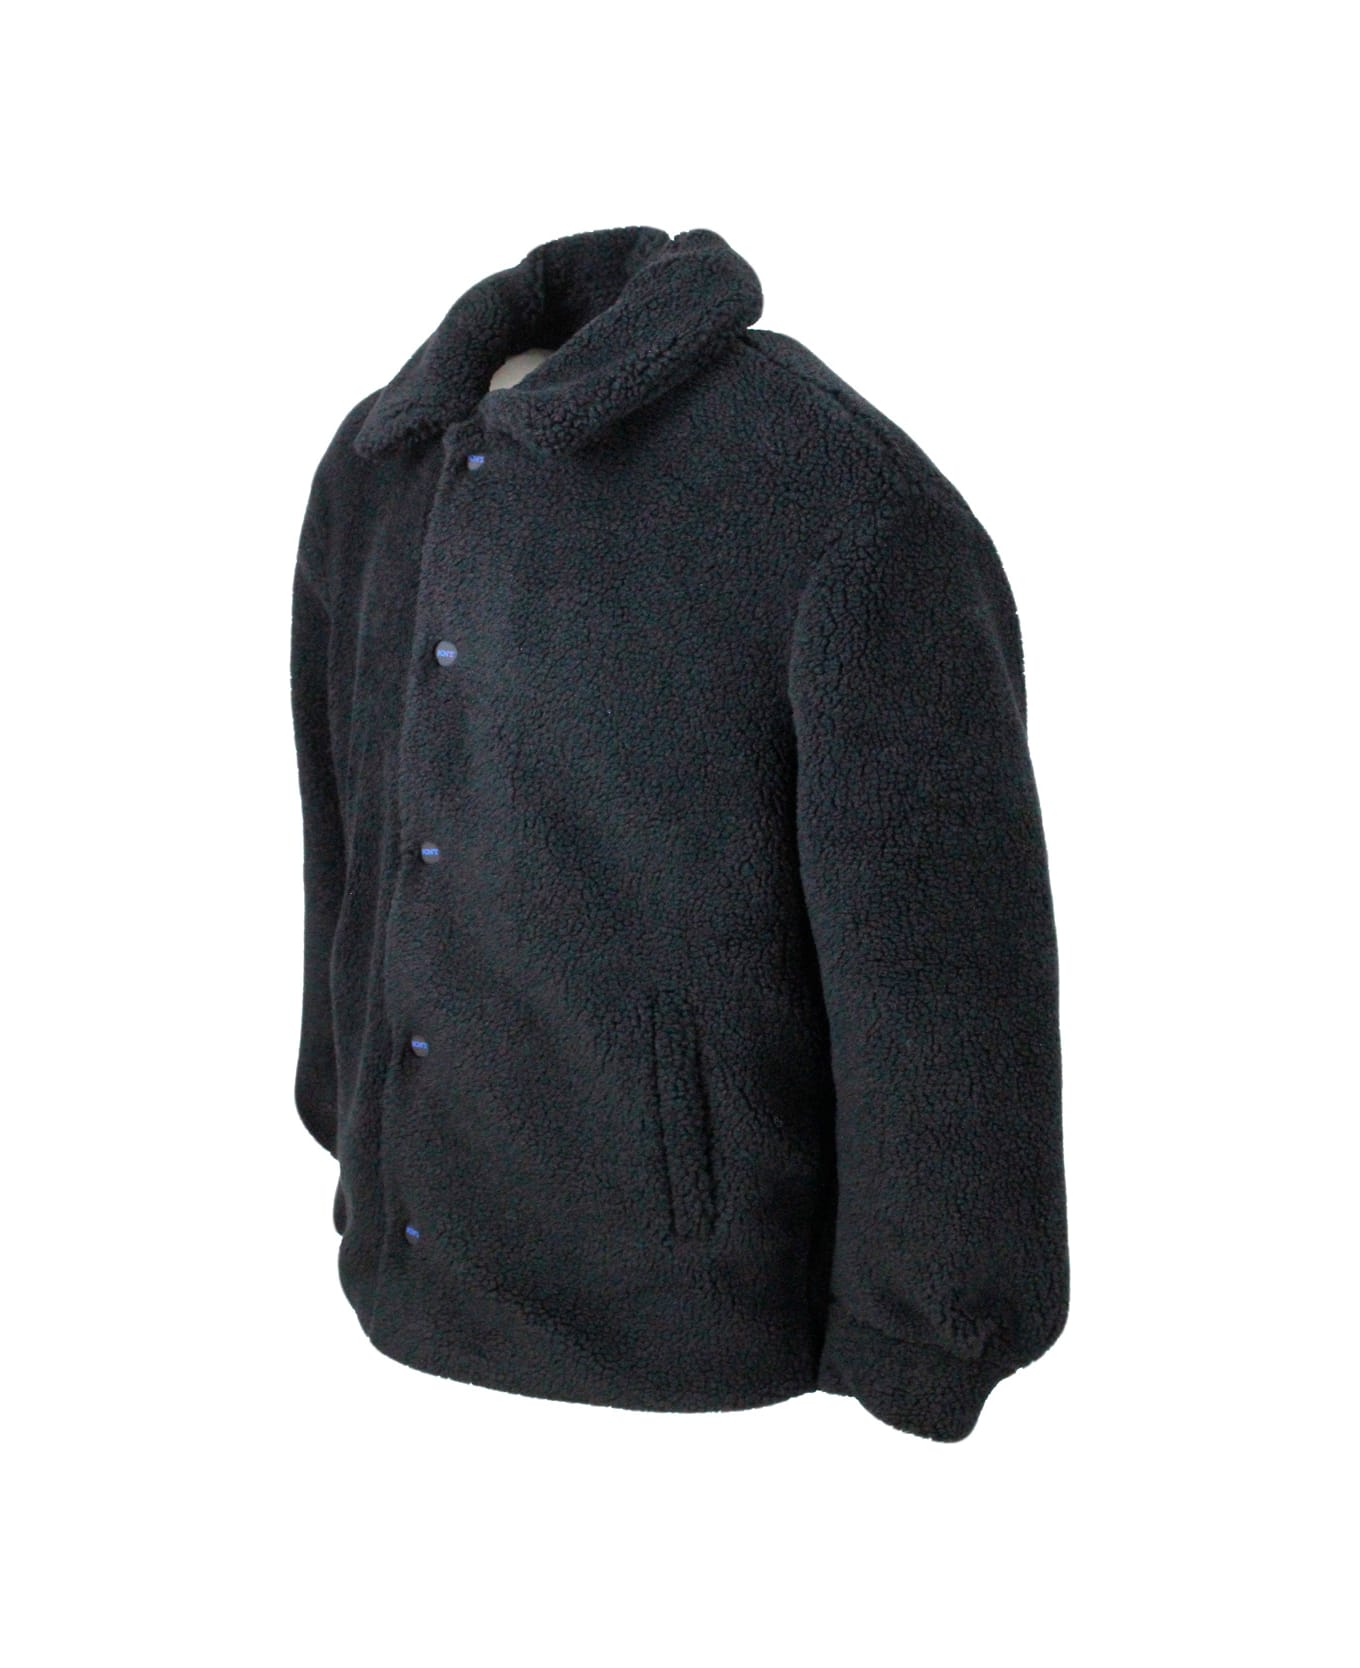 Kiton Vest Jacket With Snap Button Closure In Soft Eco Bear. Gro Trims And Matching Inner Lining - Blu navy